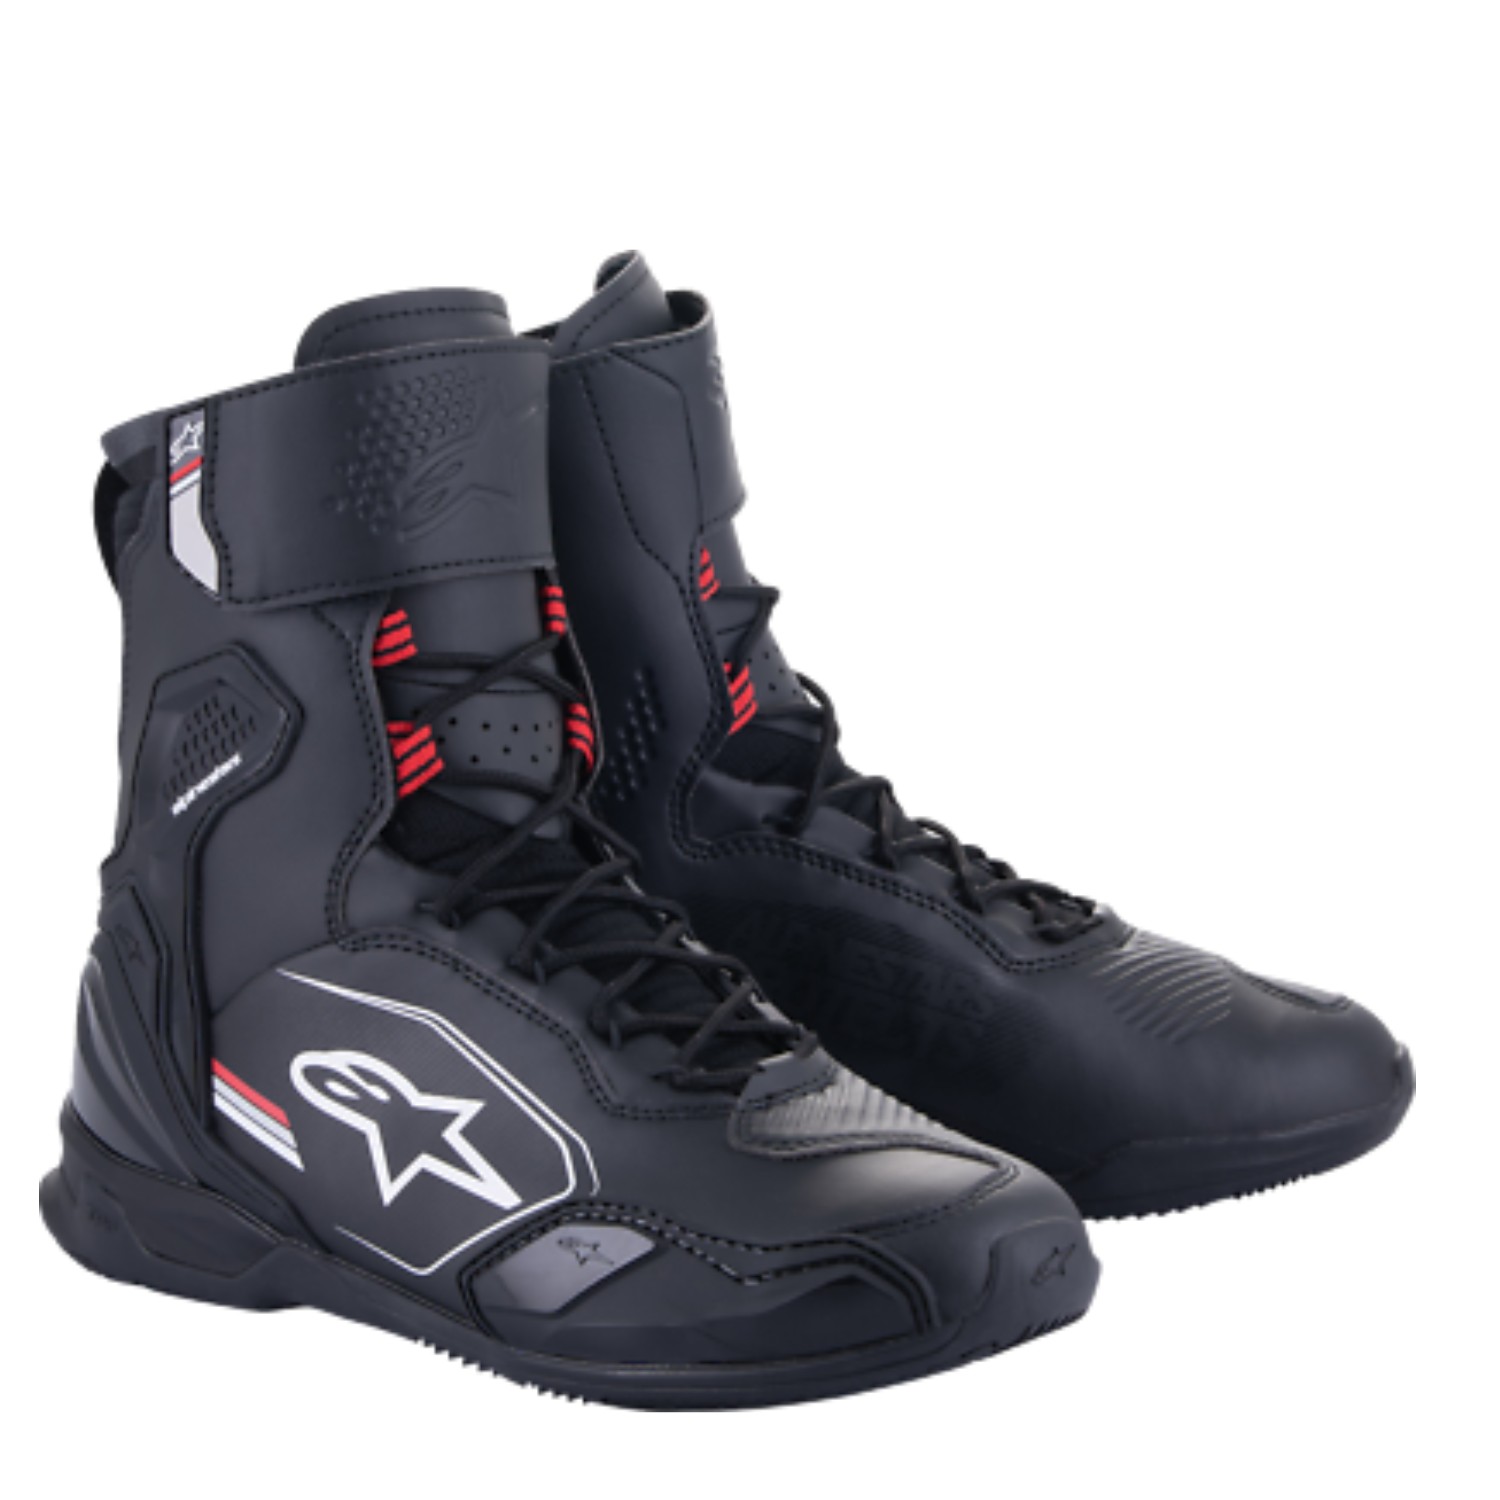 Image of EU Alpinestars Superfaster Shoes Black Gray Bright Red Taille US 135